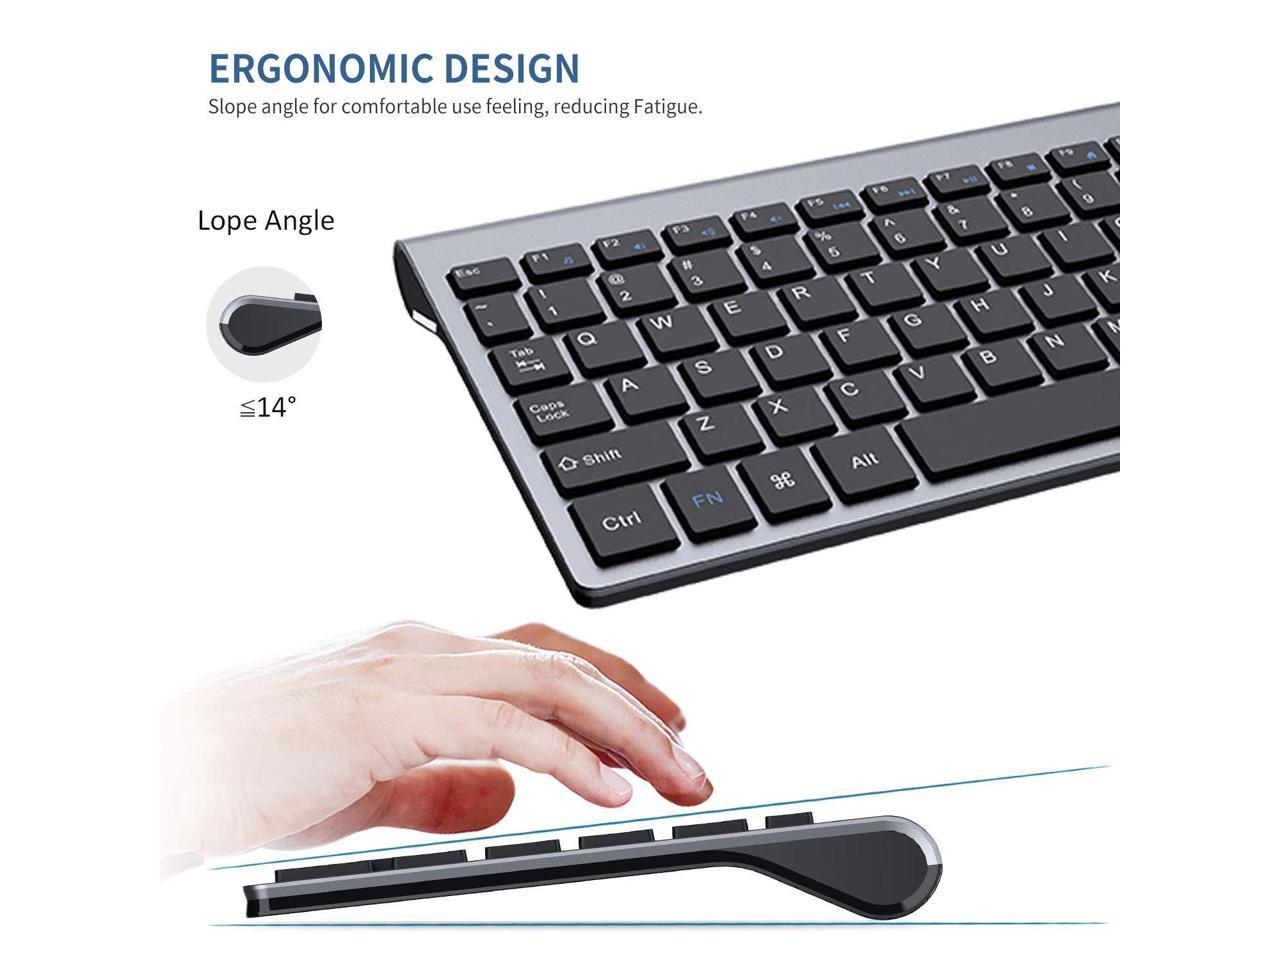 apple keyboard and mouse usb